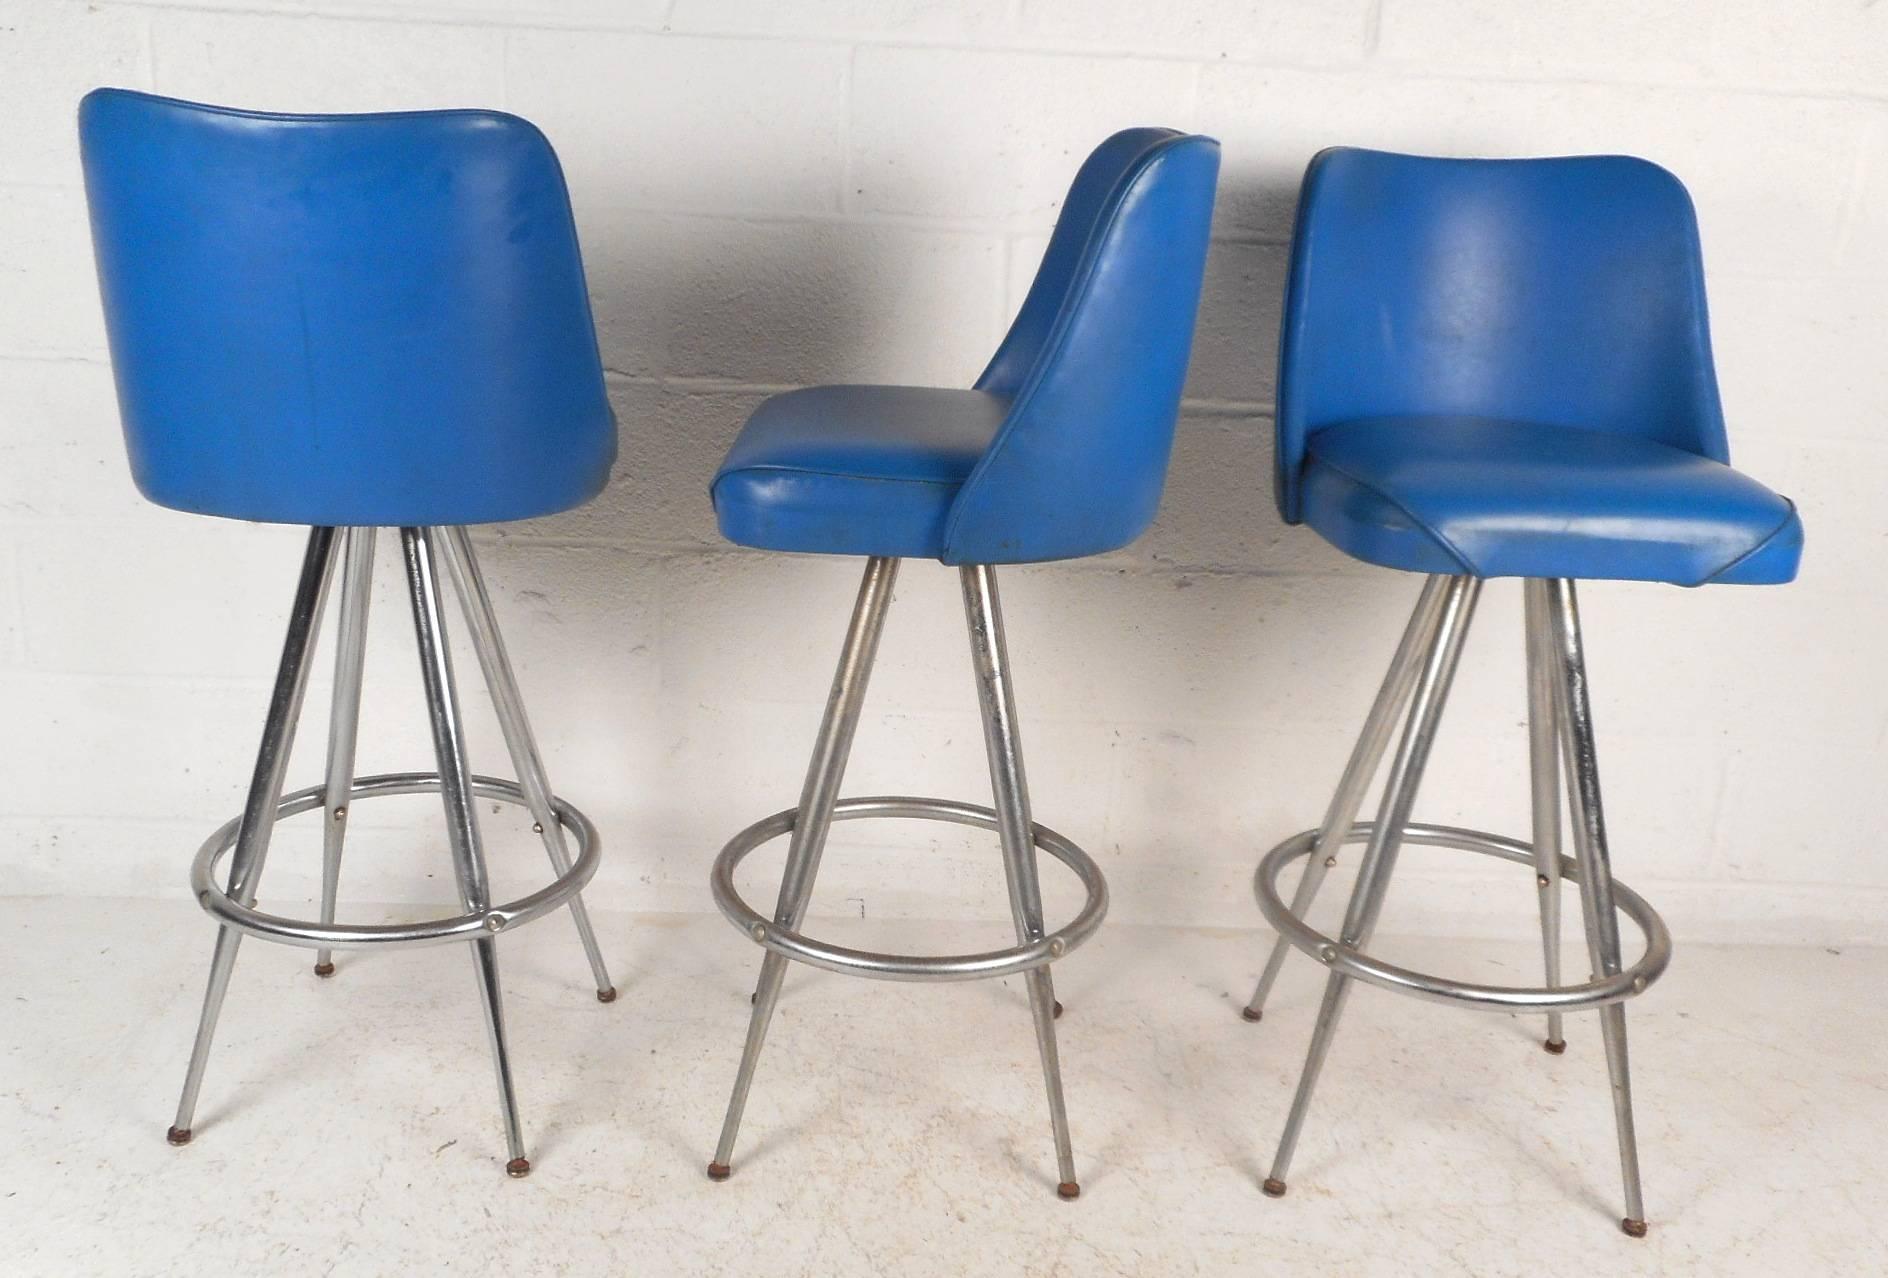 This beautiful set of four vintage modern bar stools feature elegant royal blue vinyl seats with the ability to swivel. Stylish design has tapered chrome rod legs that splay outward with a convenient round kick rest. Comfortable and sturdy chairs